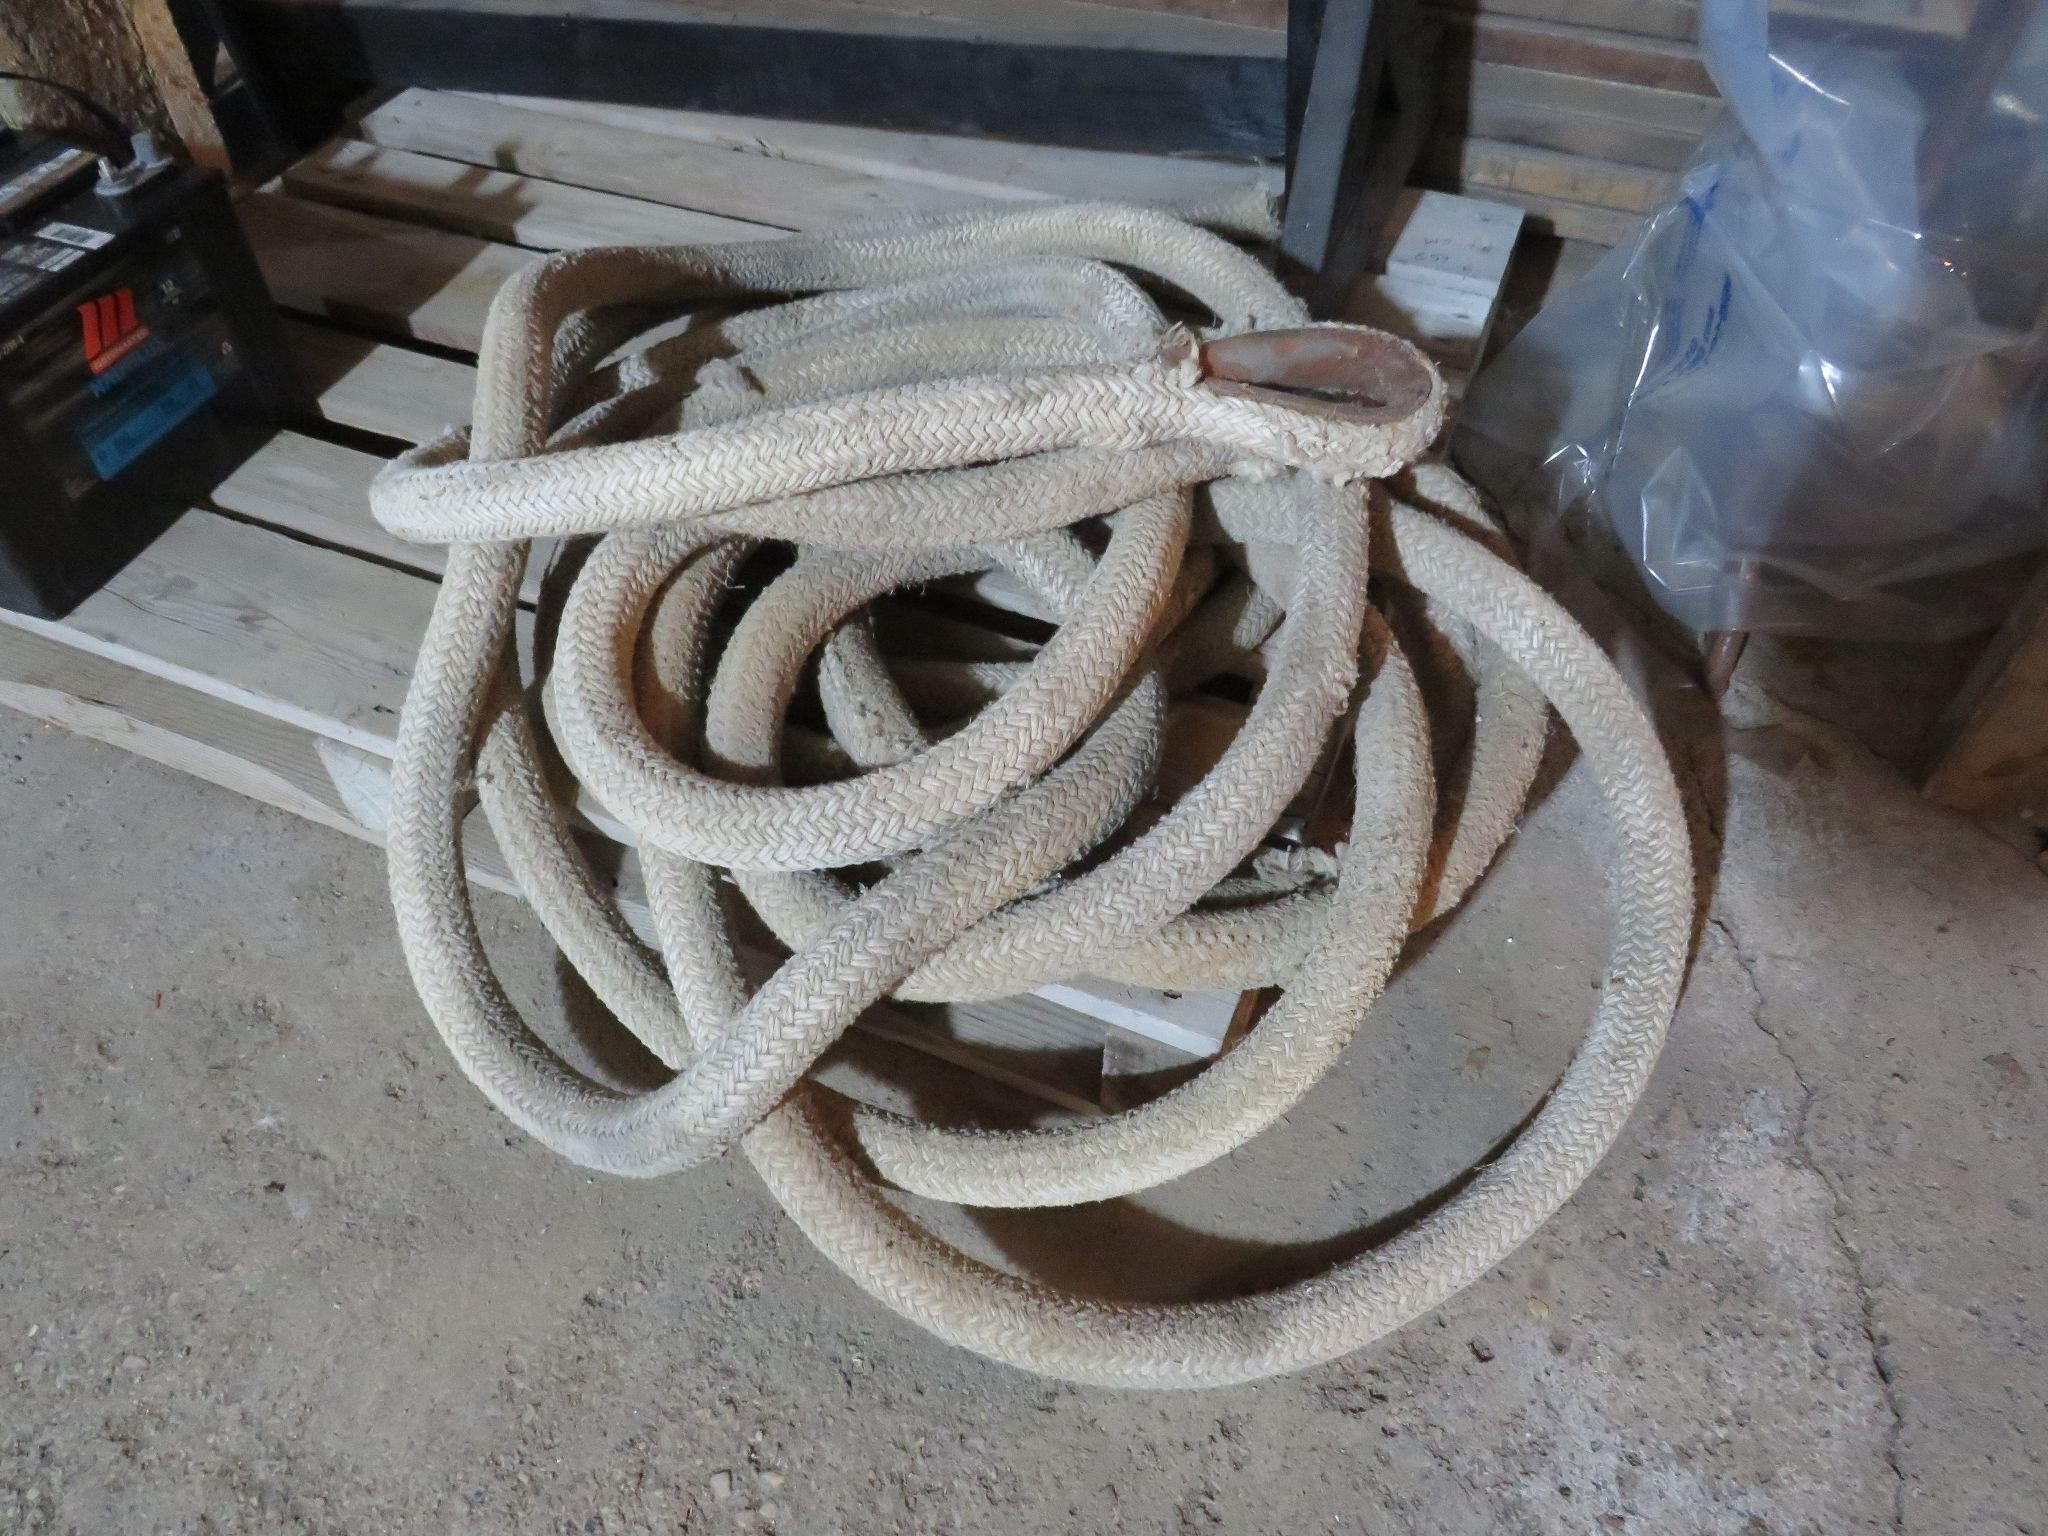 TOW ROPE LENGTH UNKNOWN